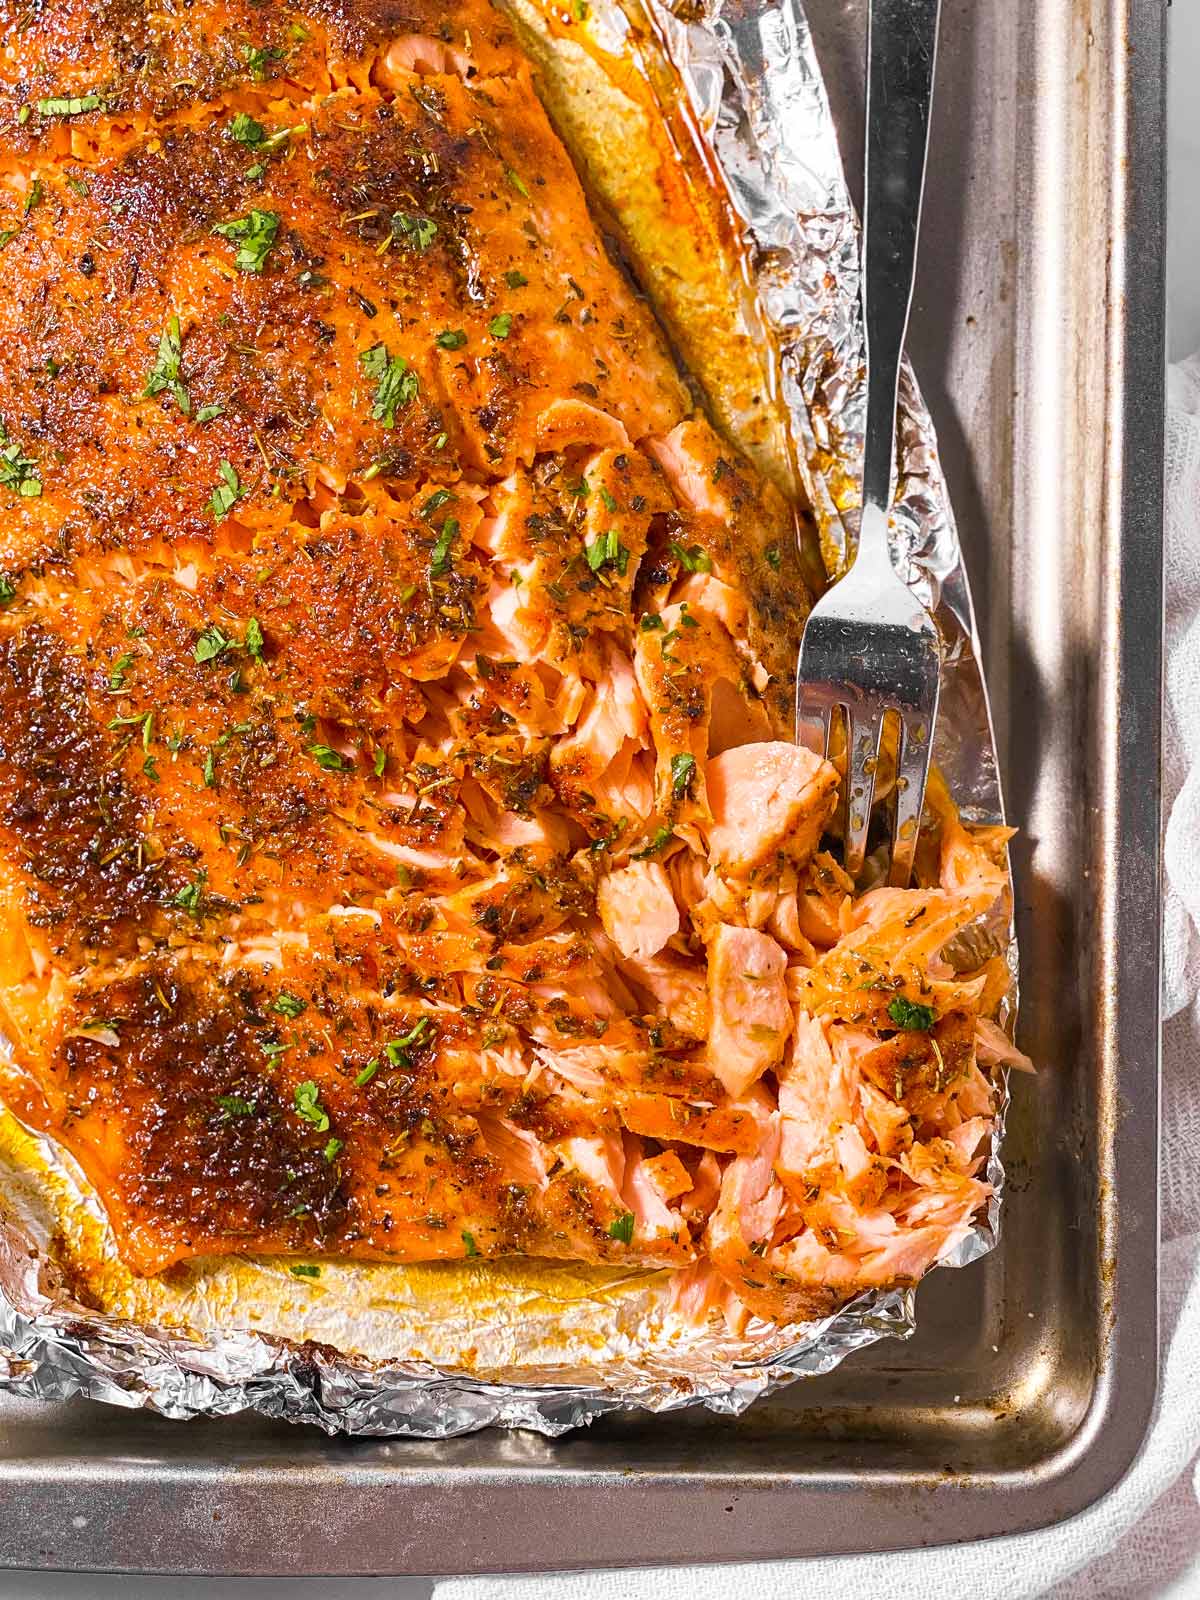 overhead view of oven baked salmon fillet on baking sheet with fork flaking fish